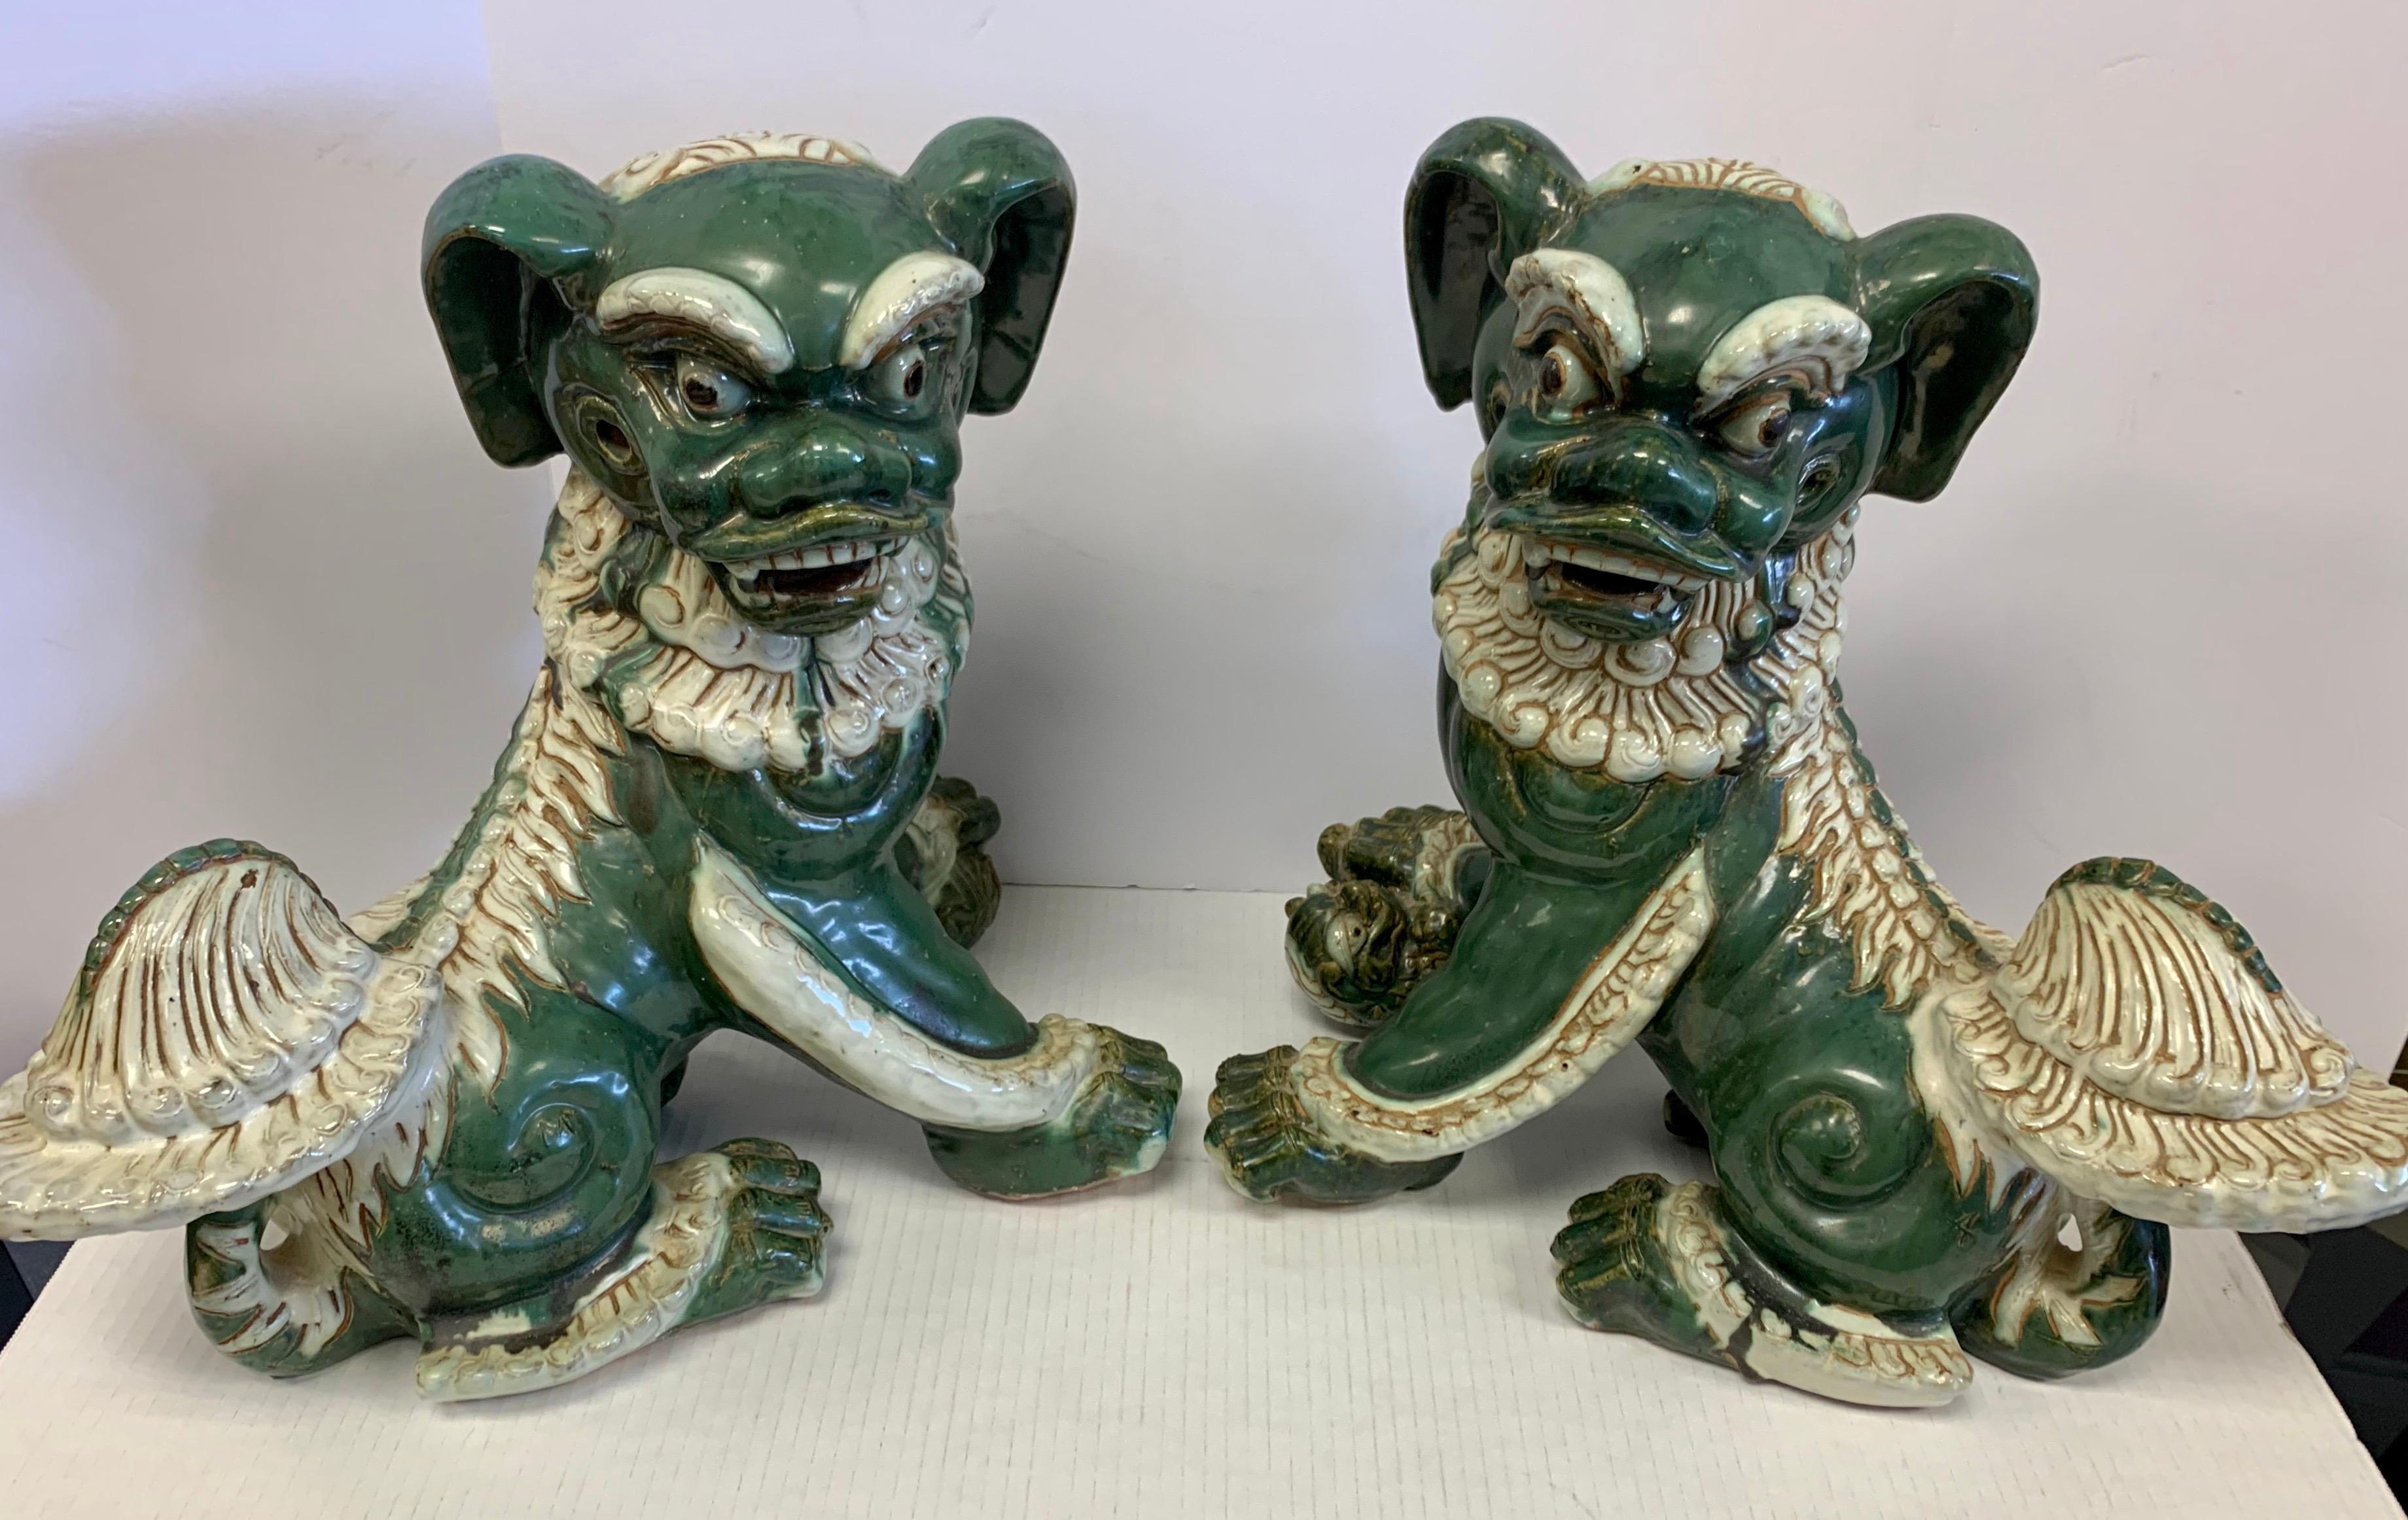 Extra-Large Pair of Chinese Glazed Porcelain Foo Dogs Sculptures 12